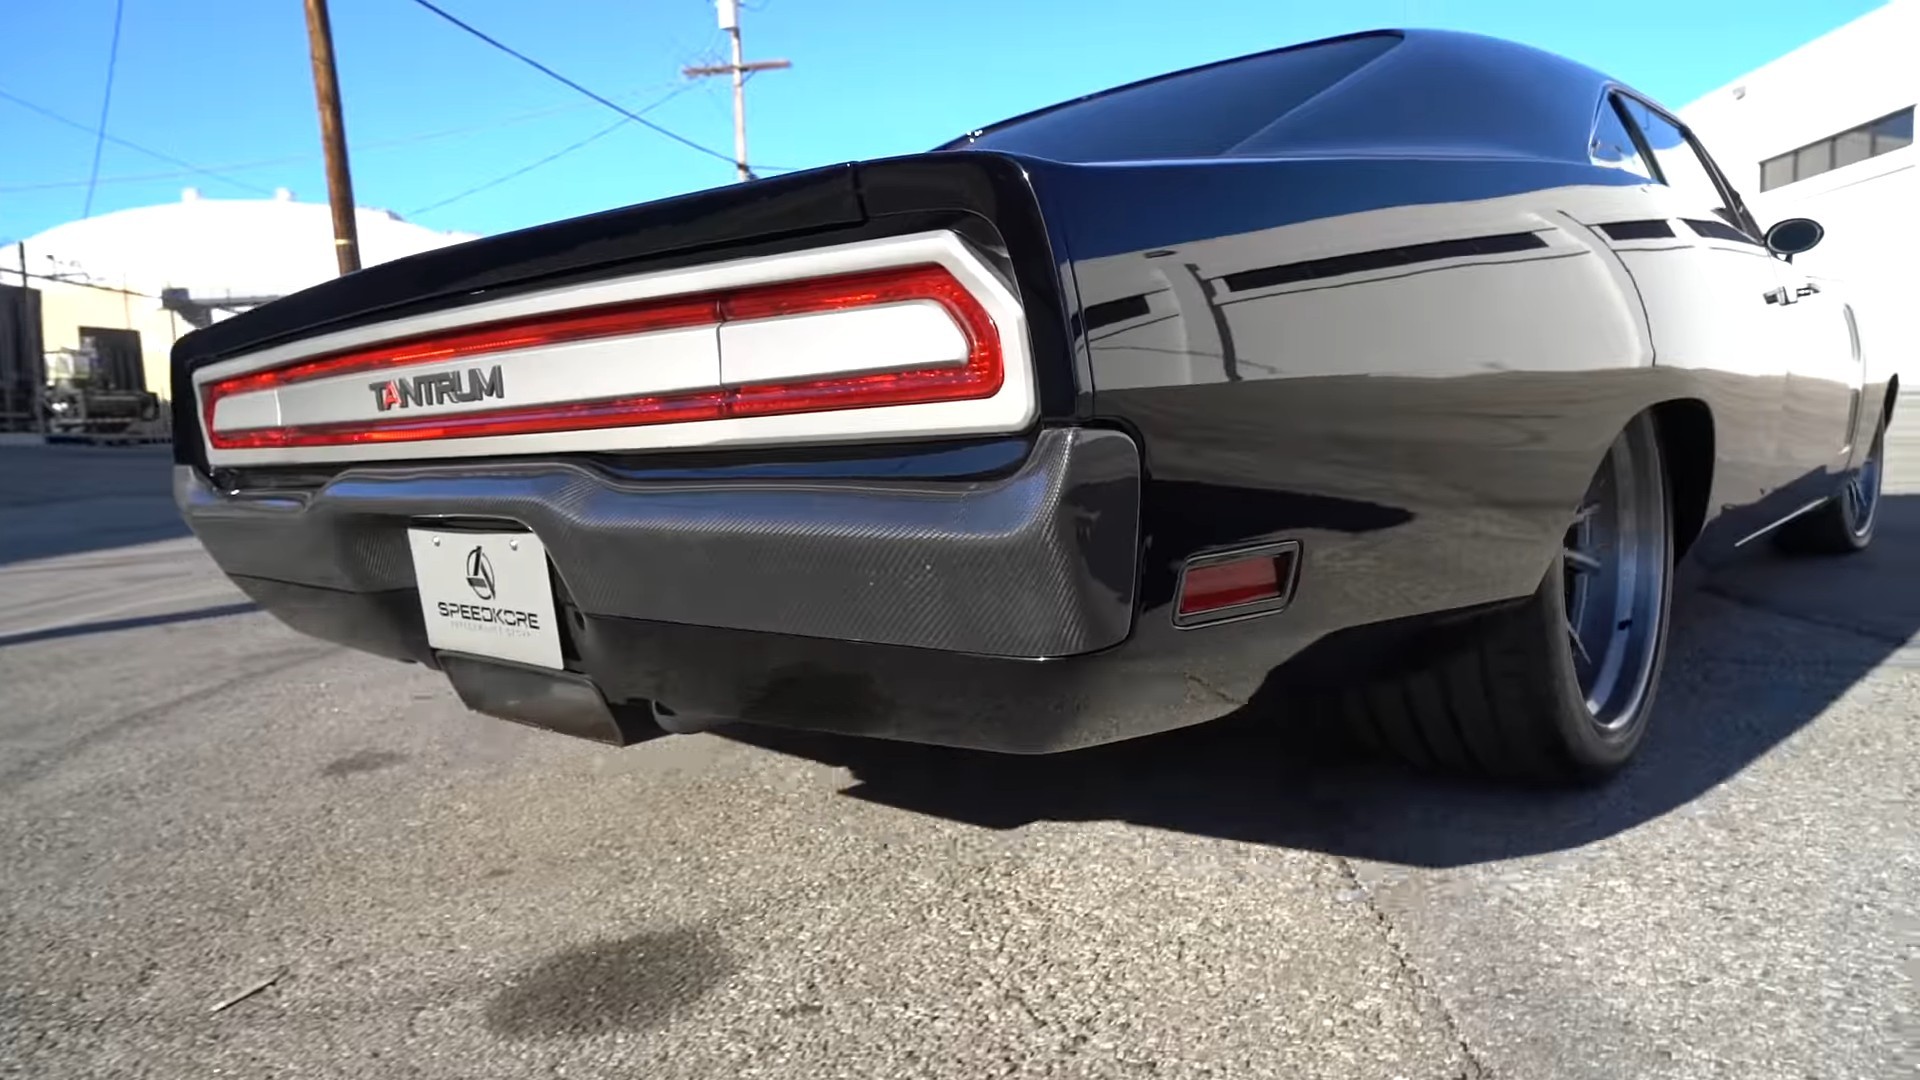 Vin Diesel’s Birthday Beast: Unveiling the 1,650hp Monster Dodge Charger